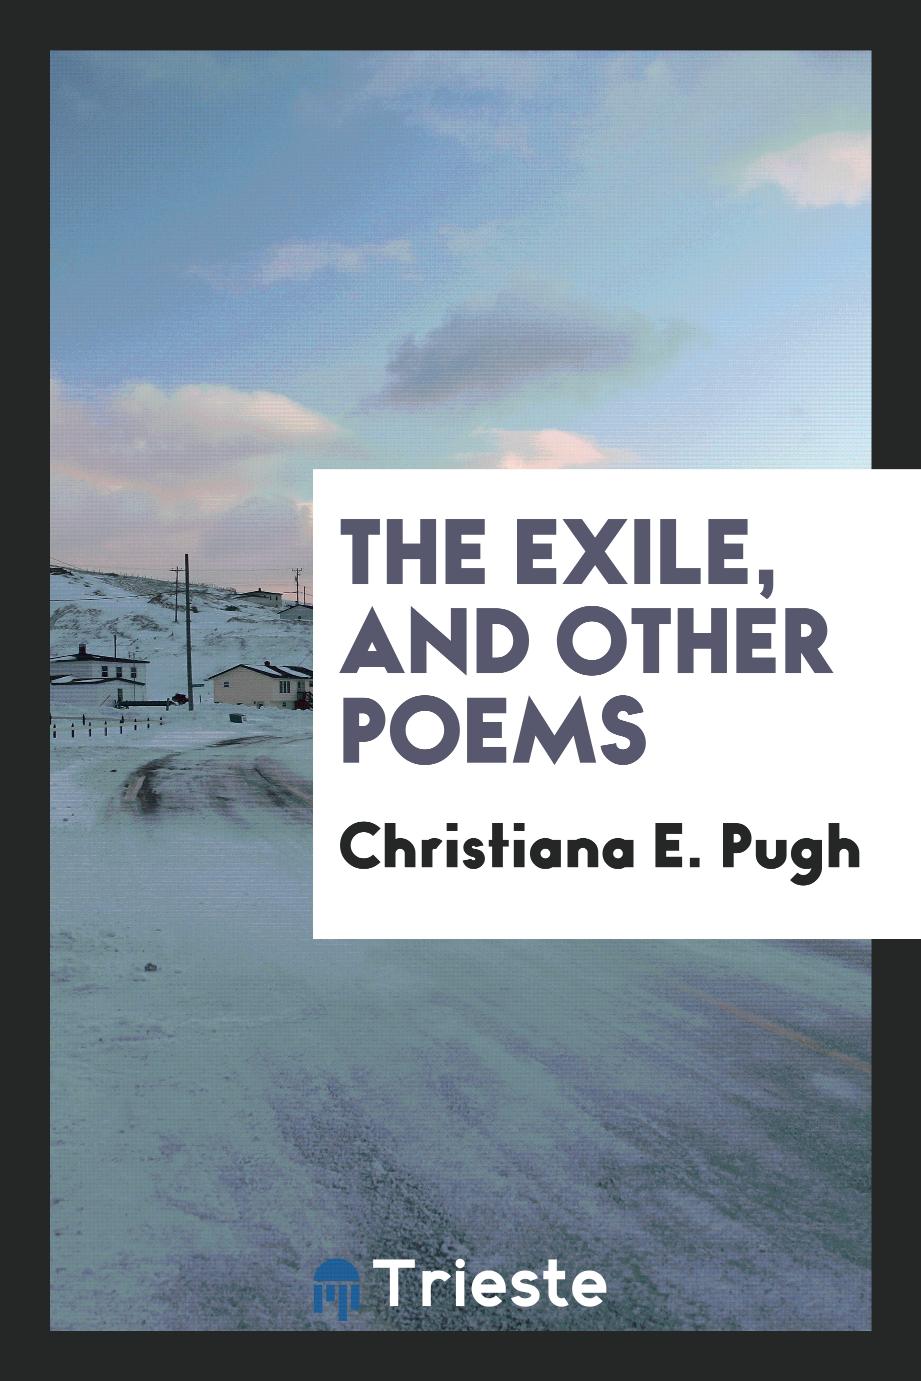 The exile, and other poems